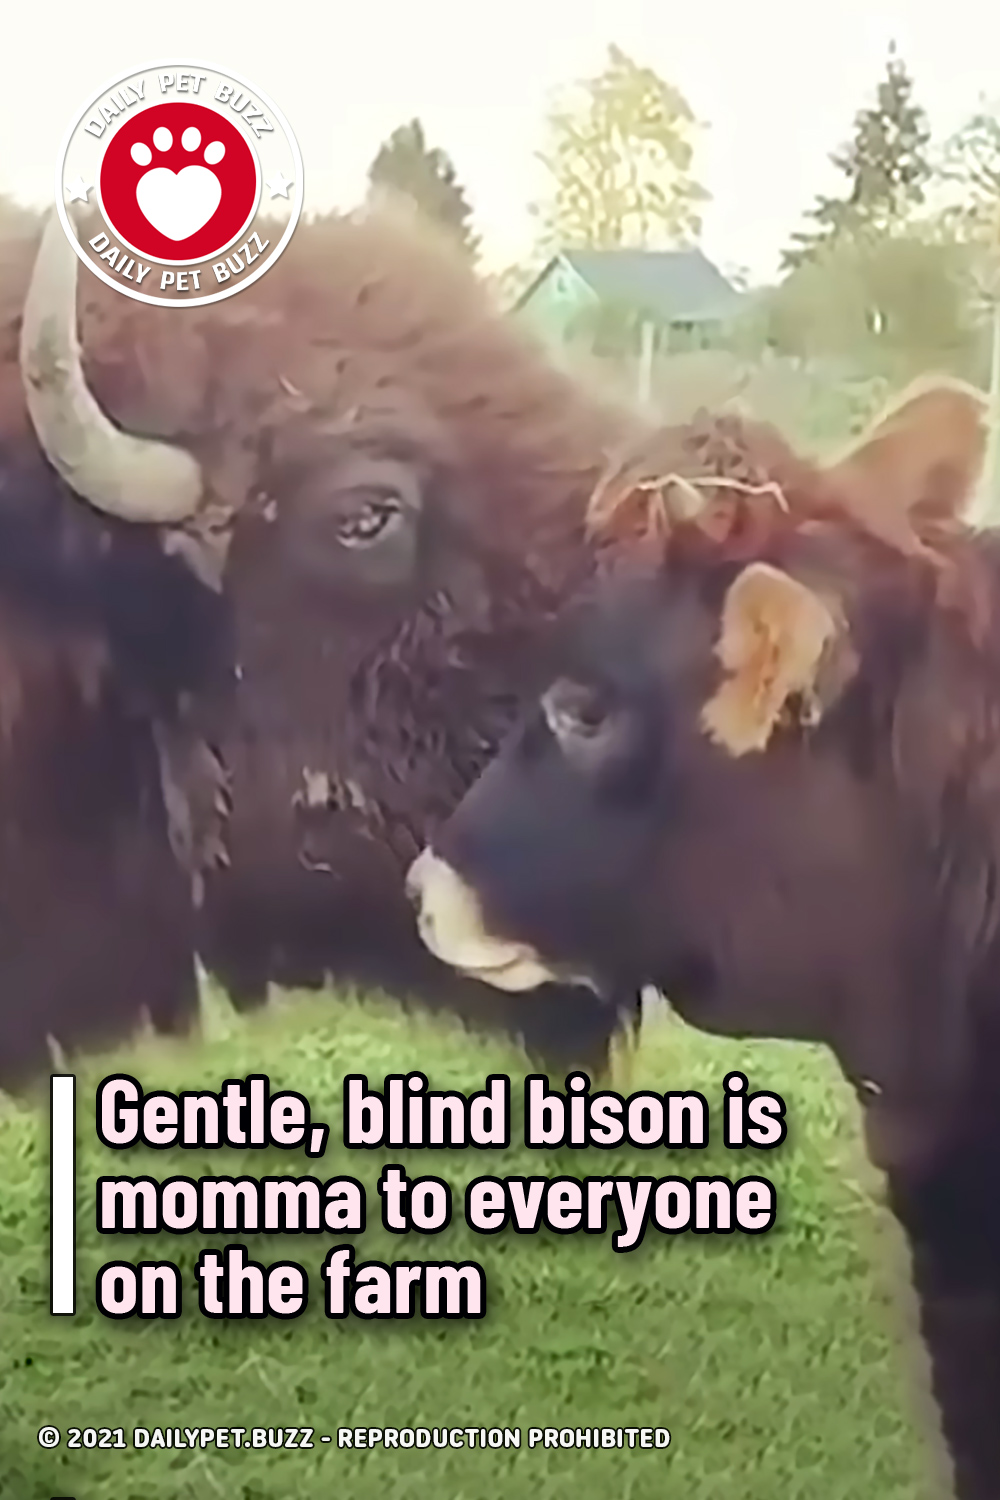 Gentle, blind buffalo is momma to everyone on the farm